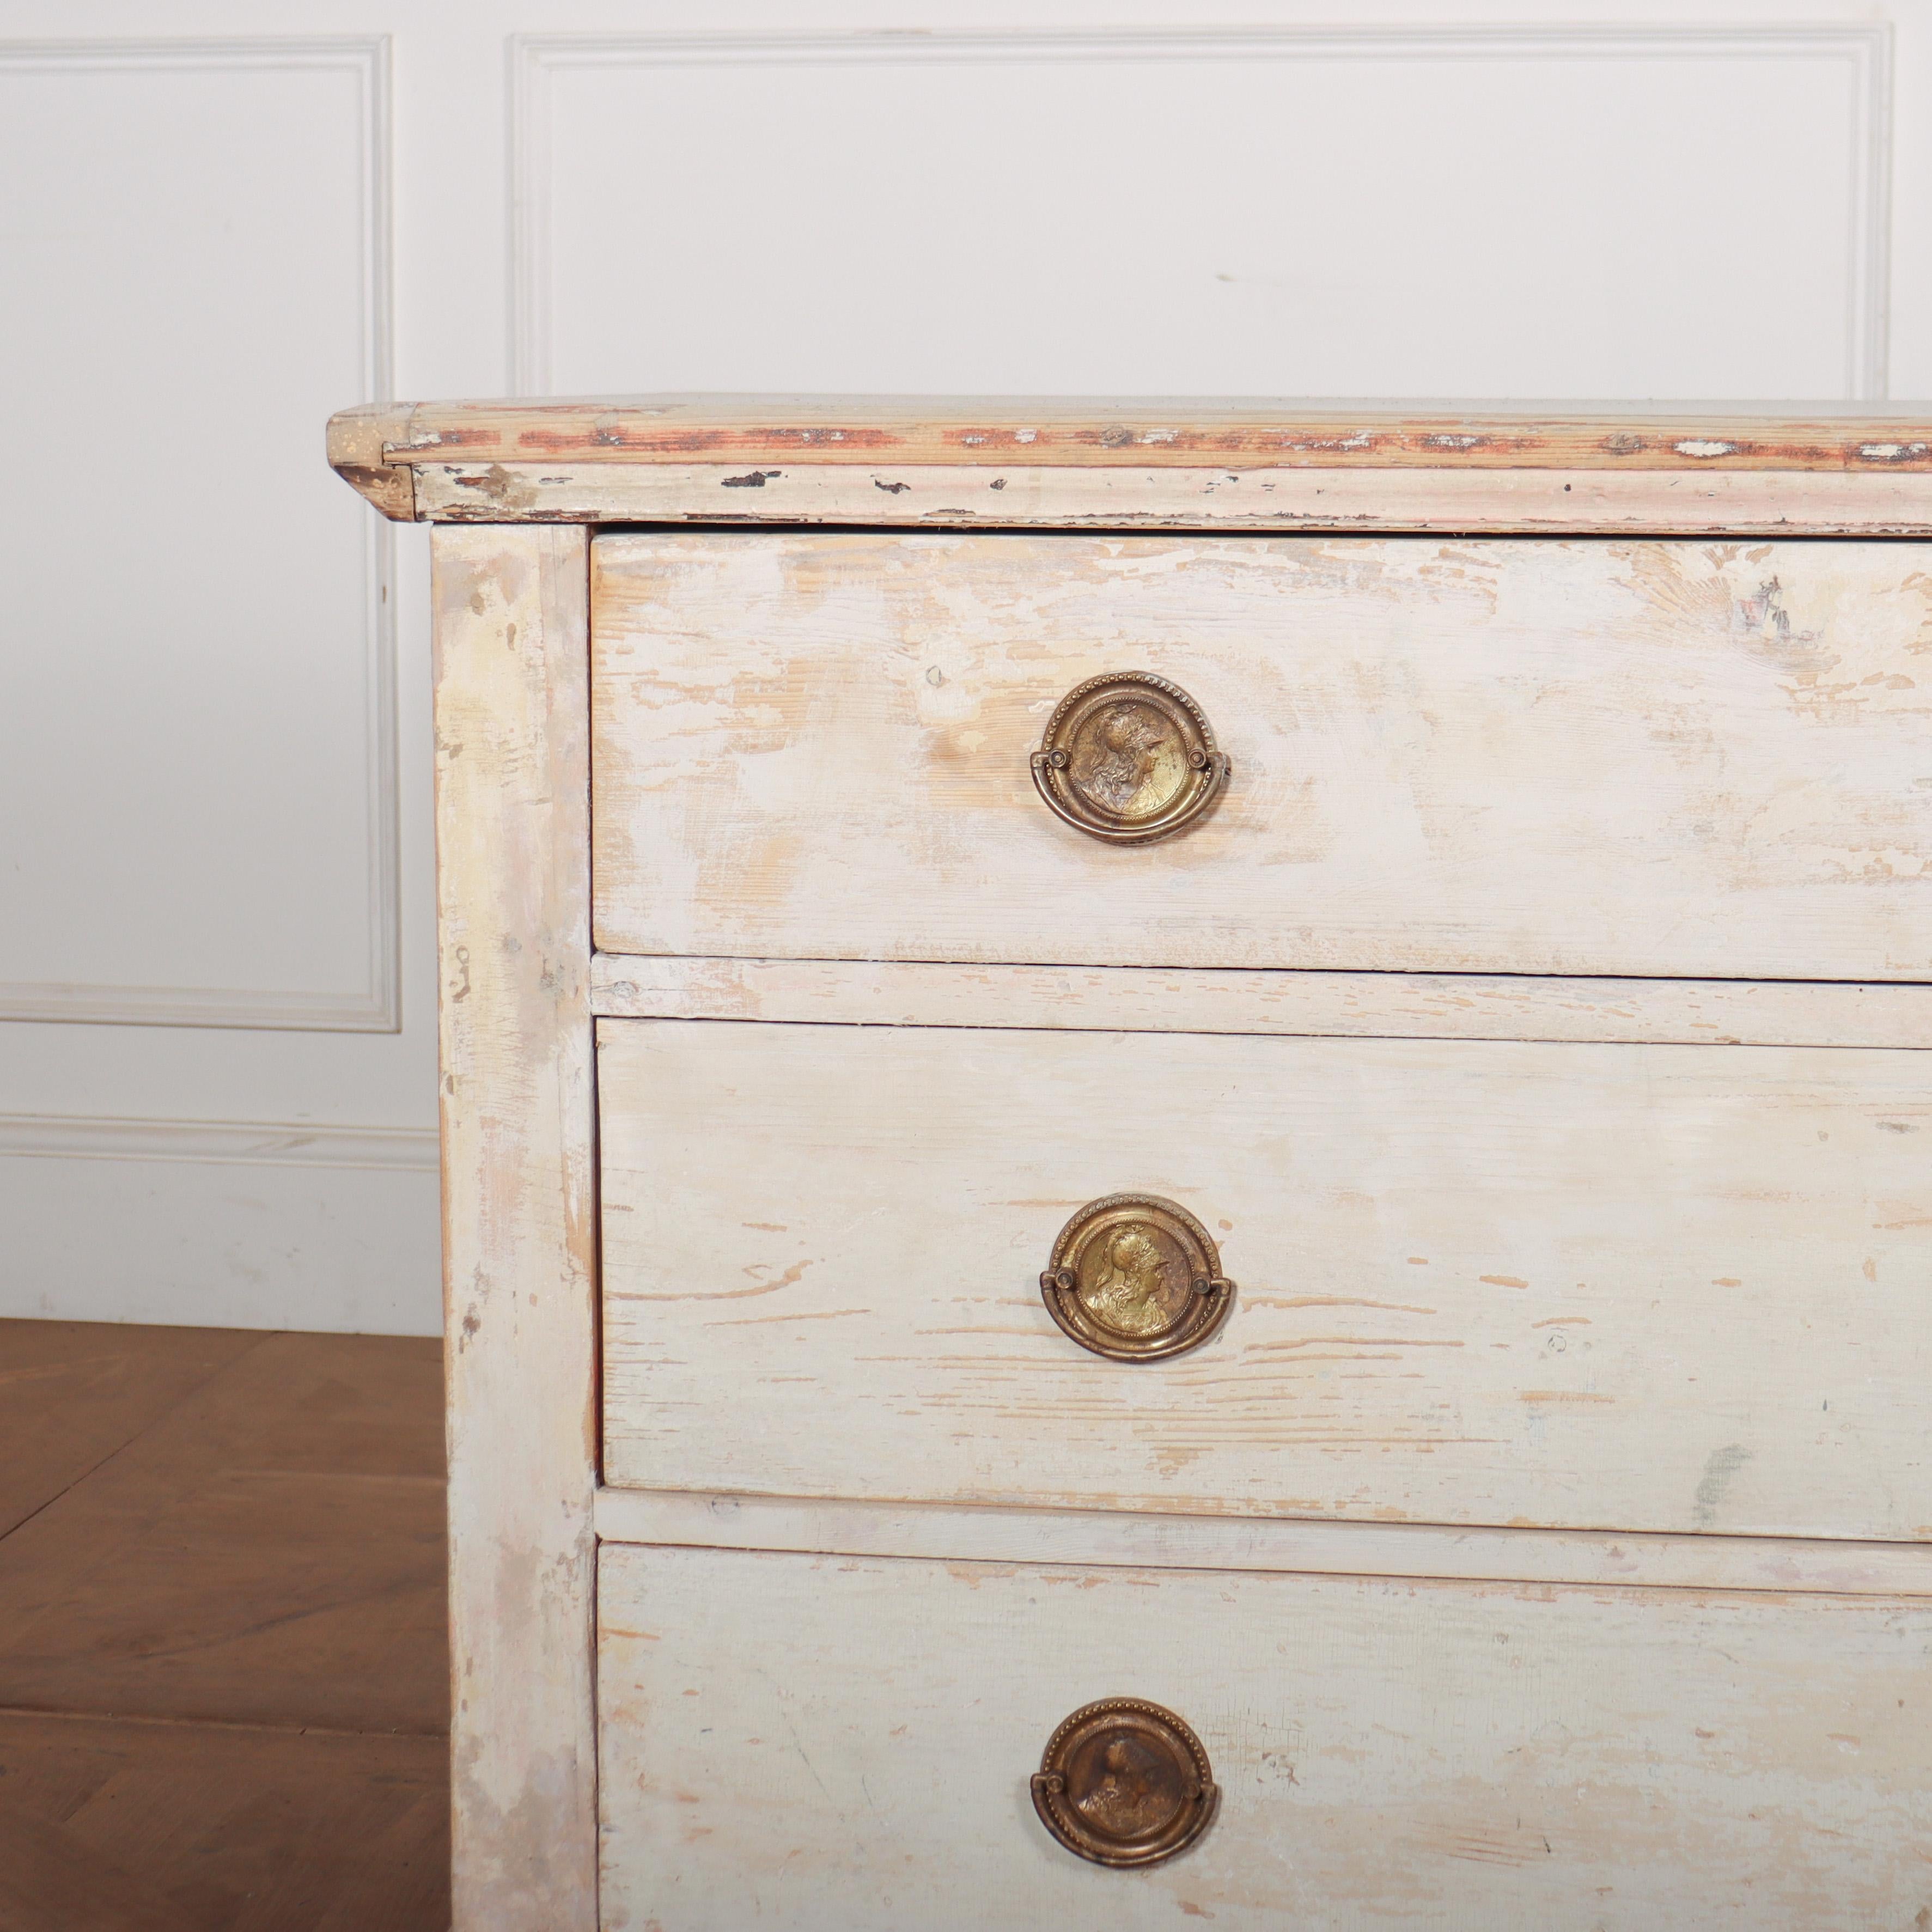 Early 19th C Austrian three drawer pine commode with original paint decoration. 1820.

Reference: 8298

Dimensions
52 inches (132 cms) Wide
23.5 inches (60 cms) Deep
30.5 inches (77 cms) High